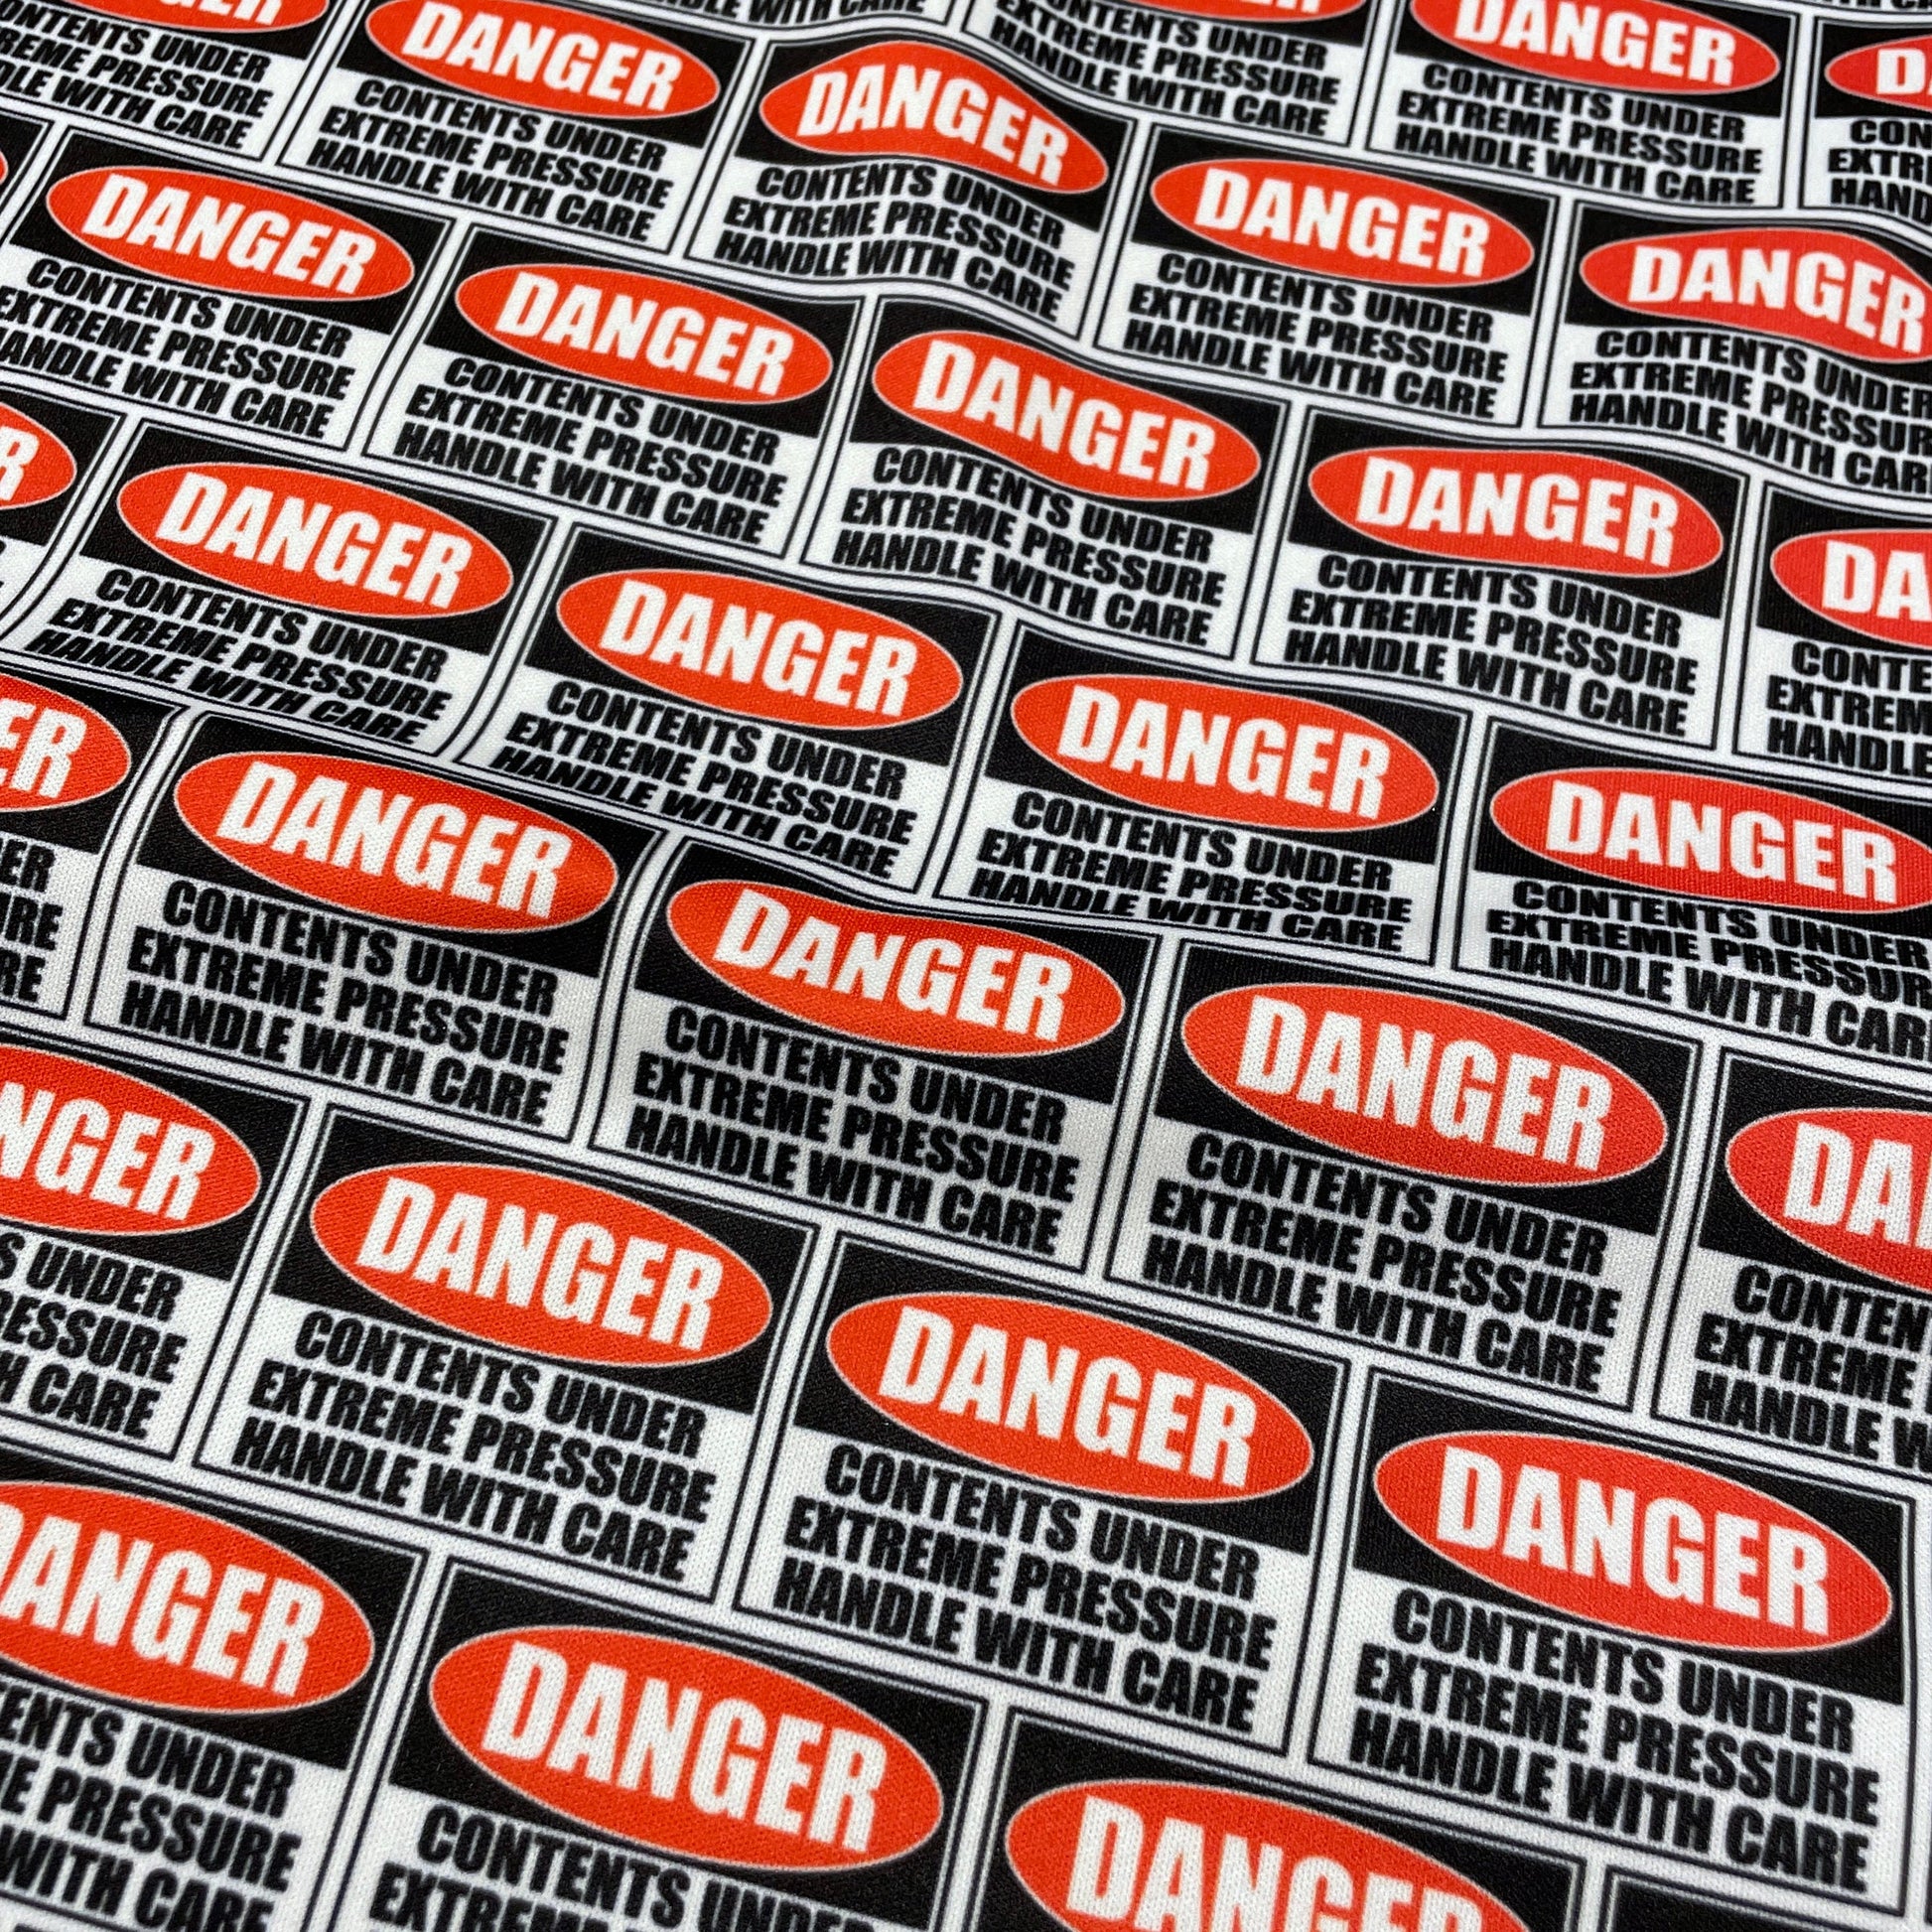 Danger Sign PUL Waterproof Fabric - 1 mil - 60" wide - Contents under pressure handle with care